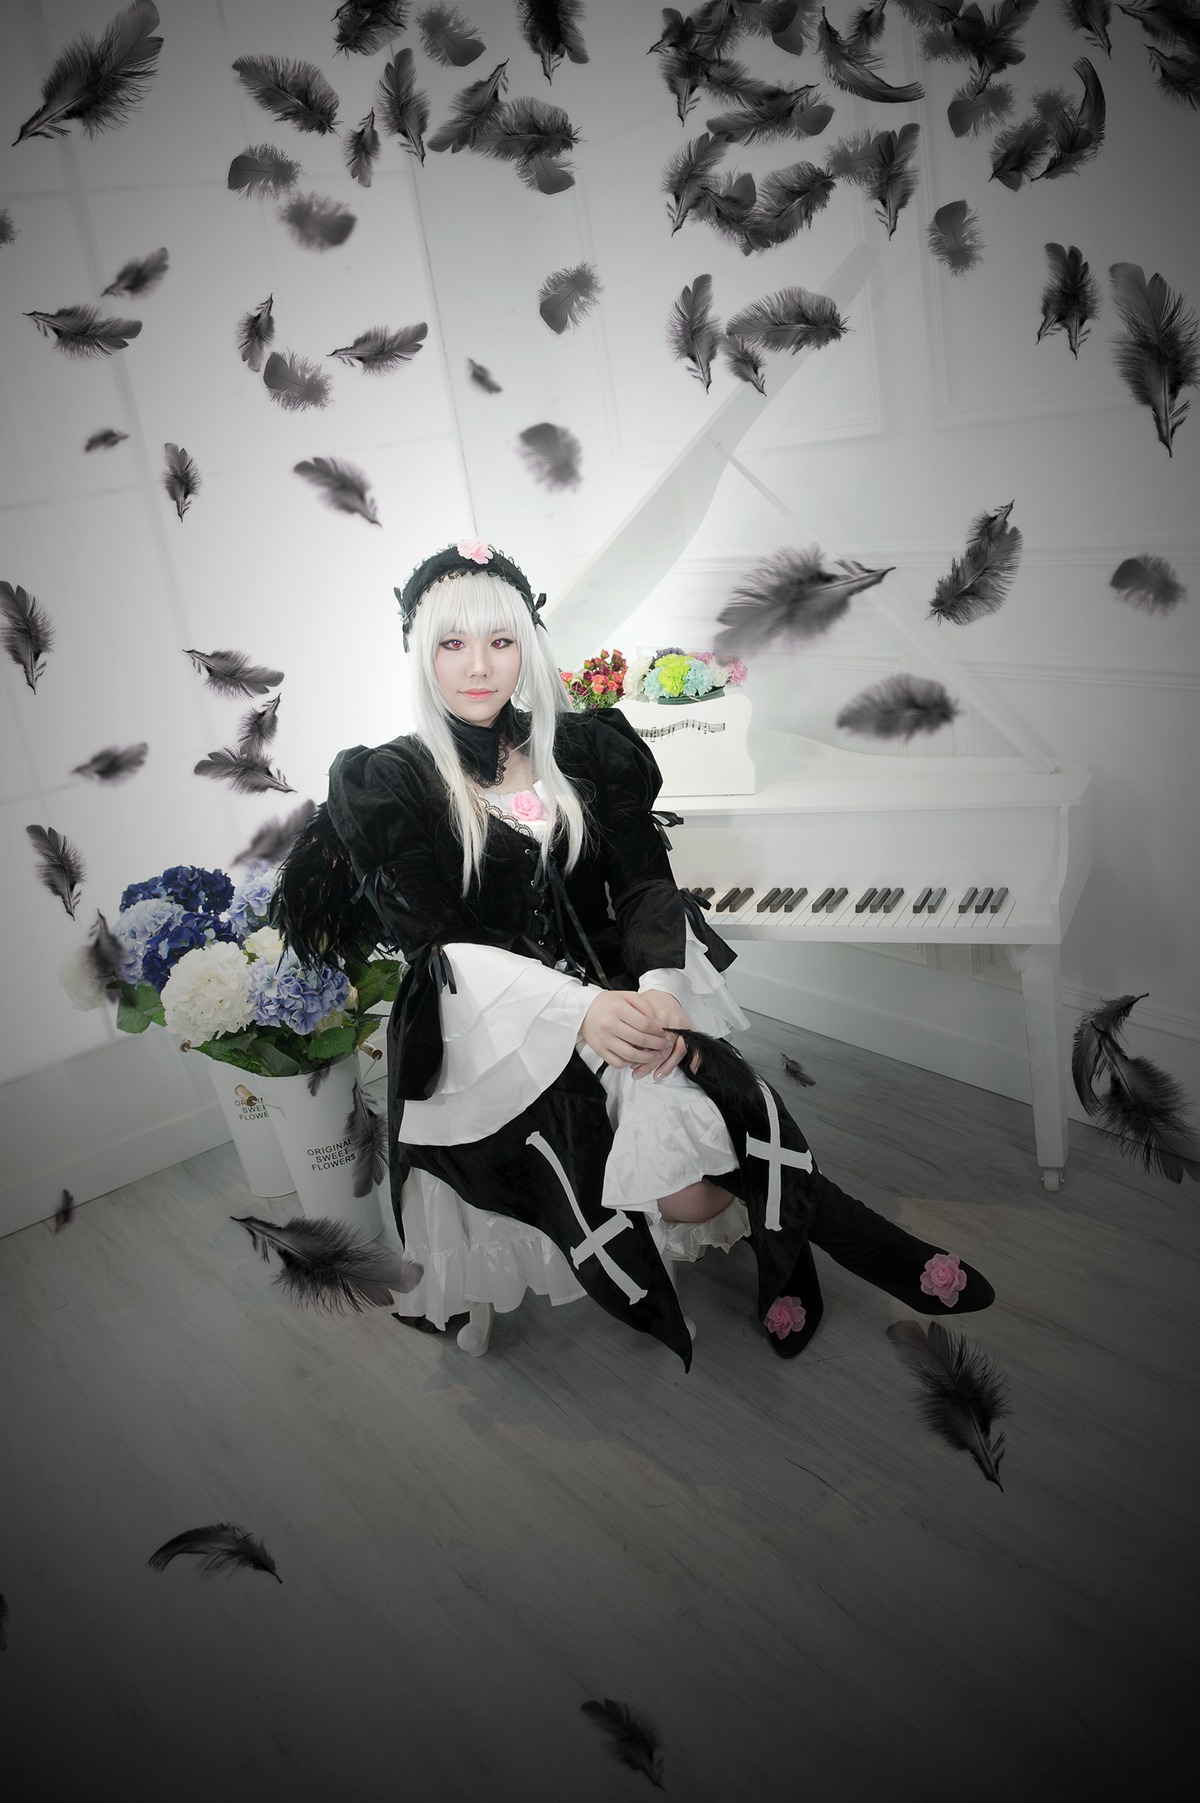 1girl animal bat bird bird_on_hand bird_on_head bird_on_shoulder black_feathers chicken crow dove dress eagle feathers flock flying frills gothic_lolita leaf long_hair owl penguin seagull sky solo sparrow standing suigintou white_feathers